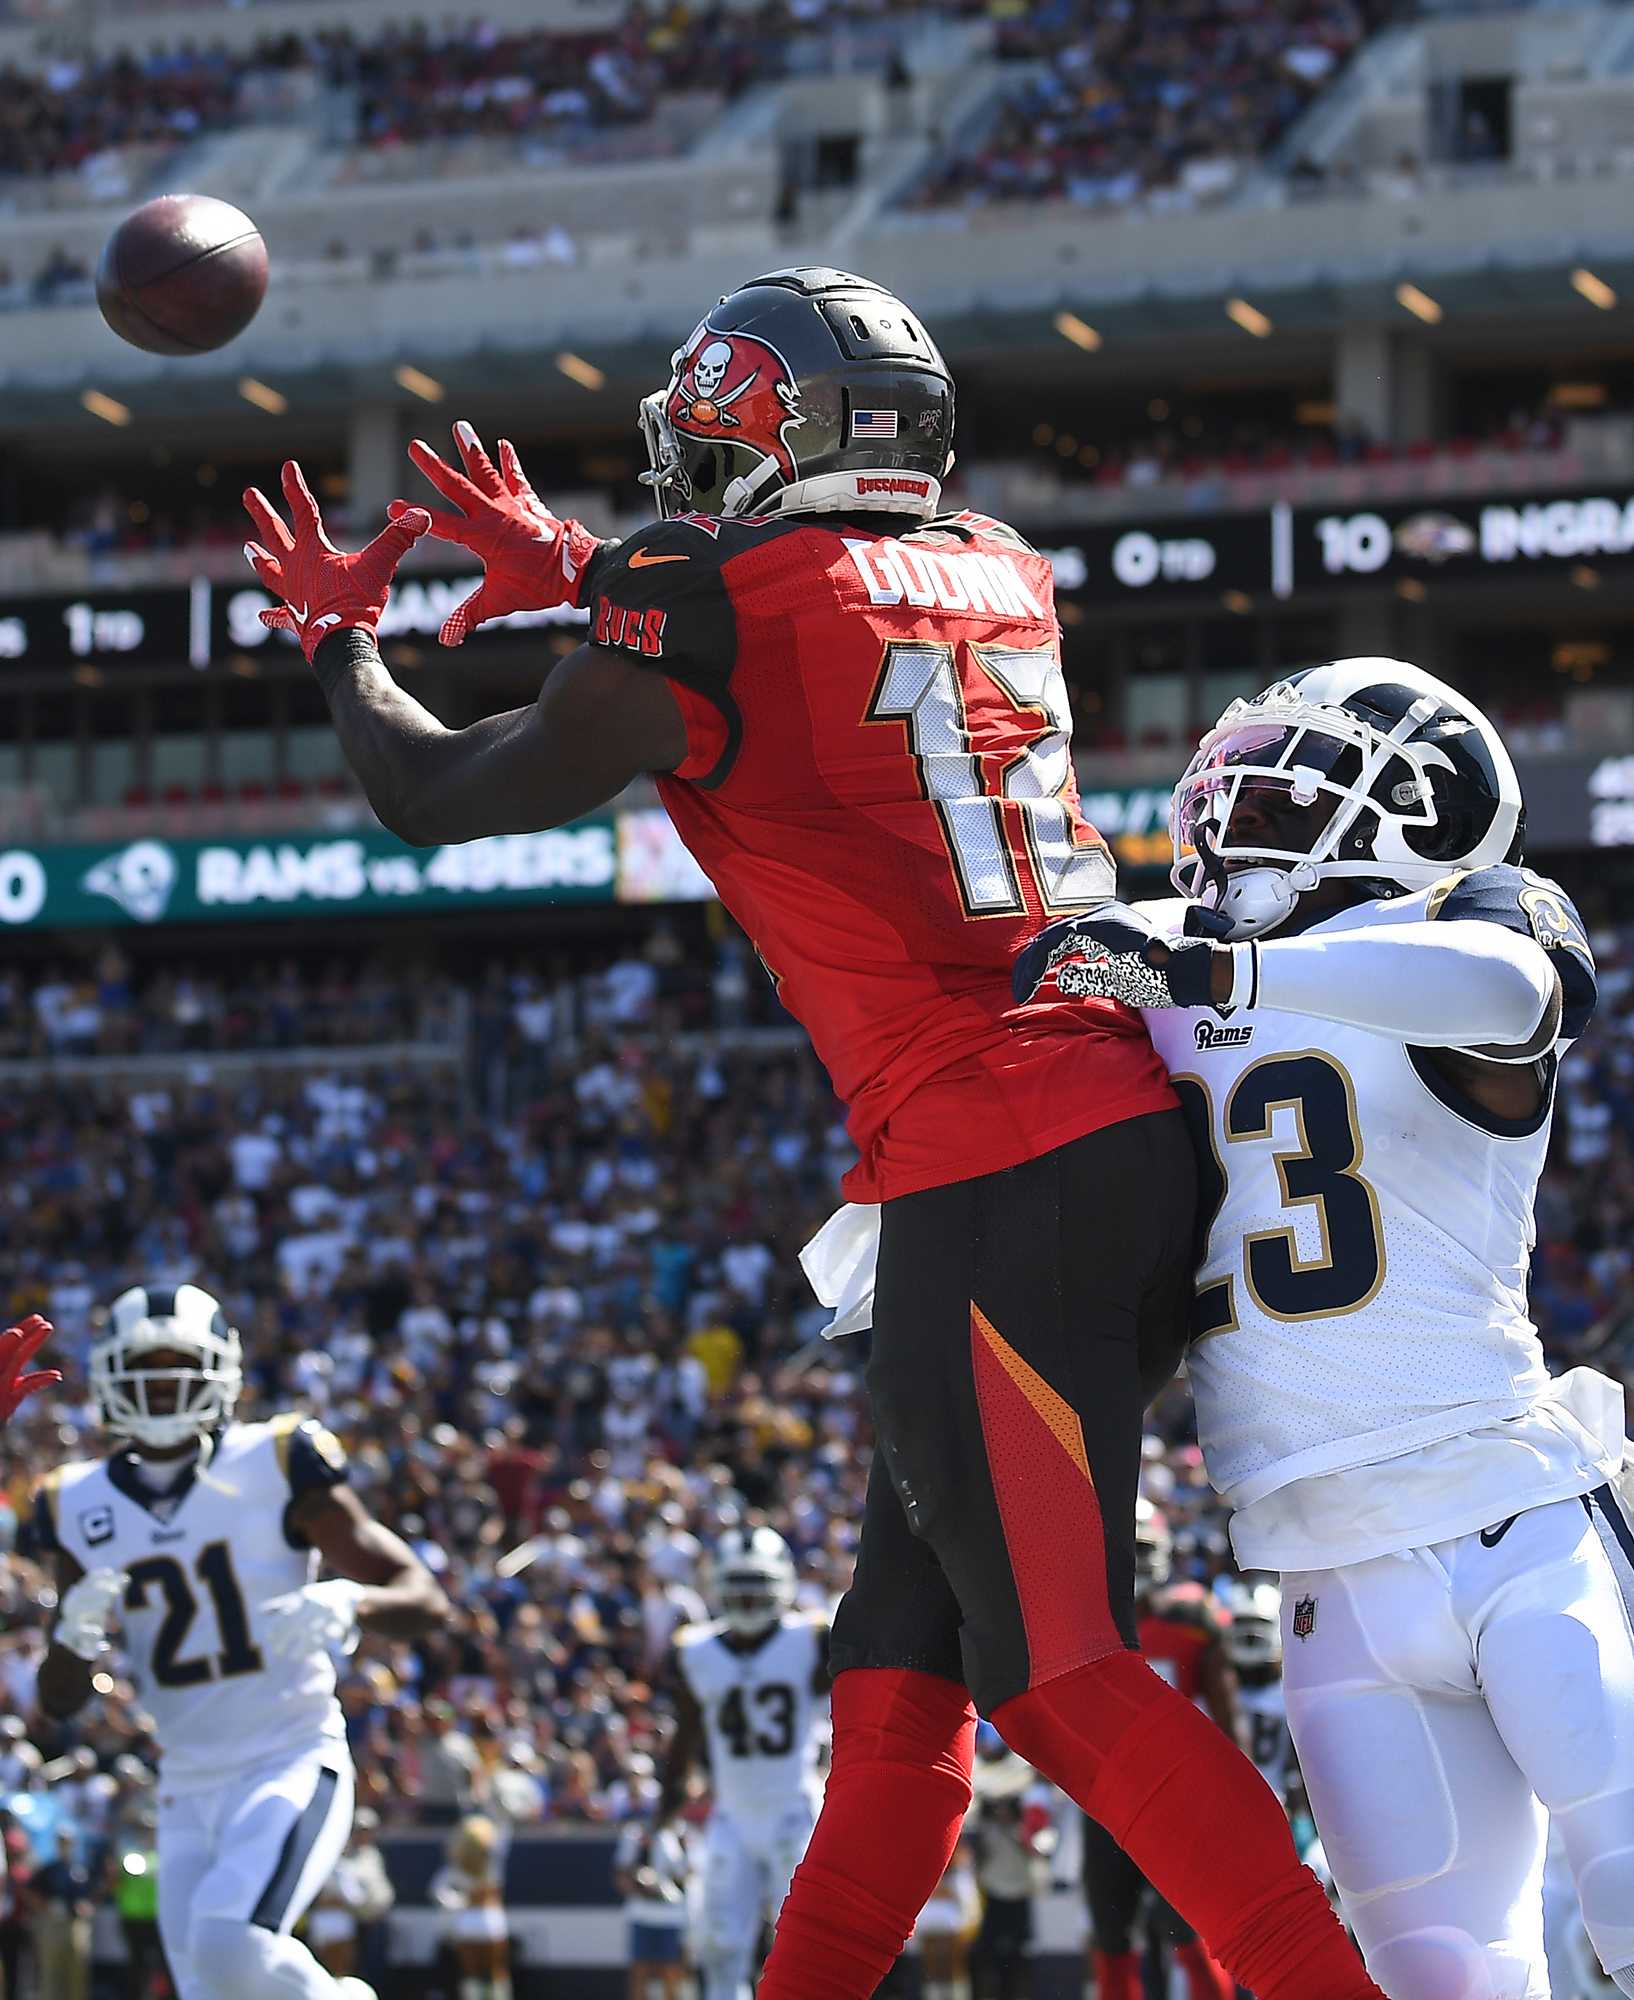 Tampa Bay Buccaneers wide receiver Chris Godwin (12) catches a touchdown pass in front of Los Angeles Rams corneback Nickell Robey-Coleman in the second quarter at the Los Angeles Coliseum on Sunday, Sept. 29, 2019, in Los Angeles. The Buccaneers won, 55-40. (Wally Skalij/Los Angeles Times/TNS)